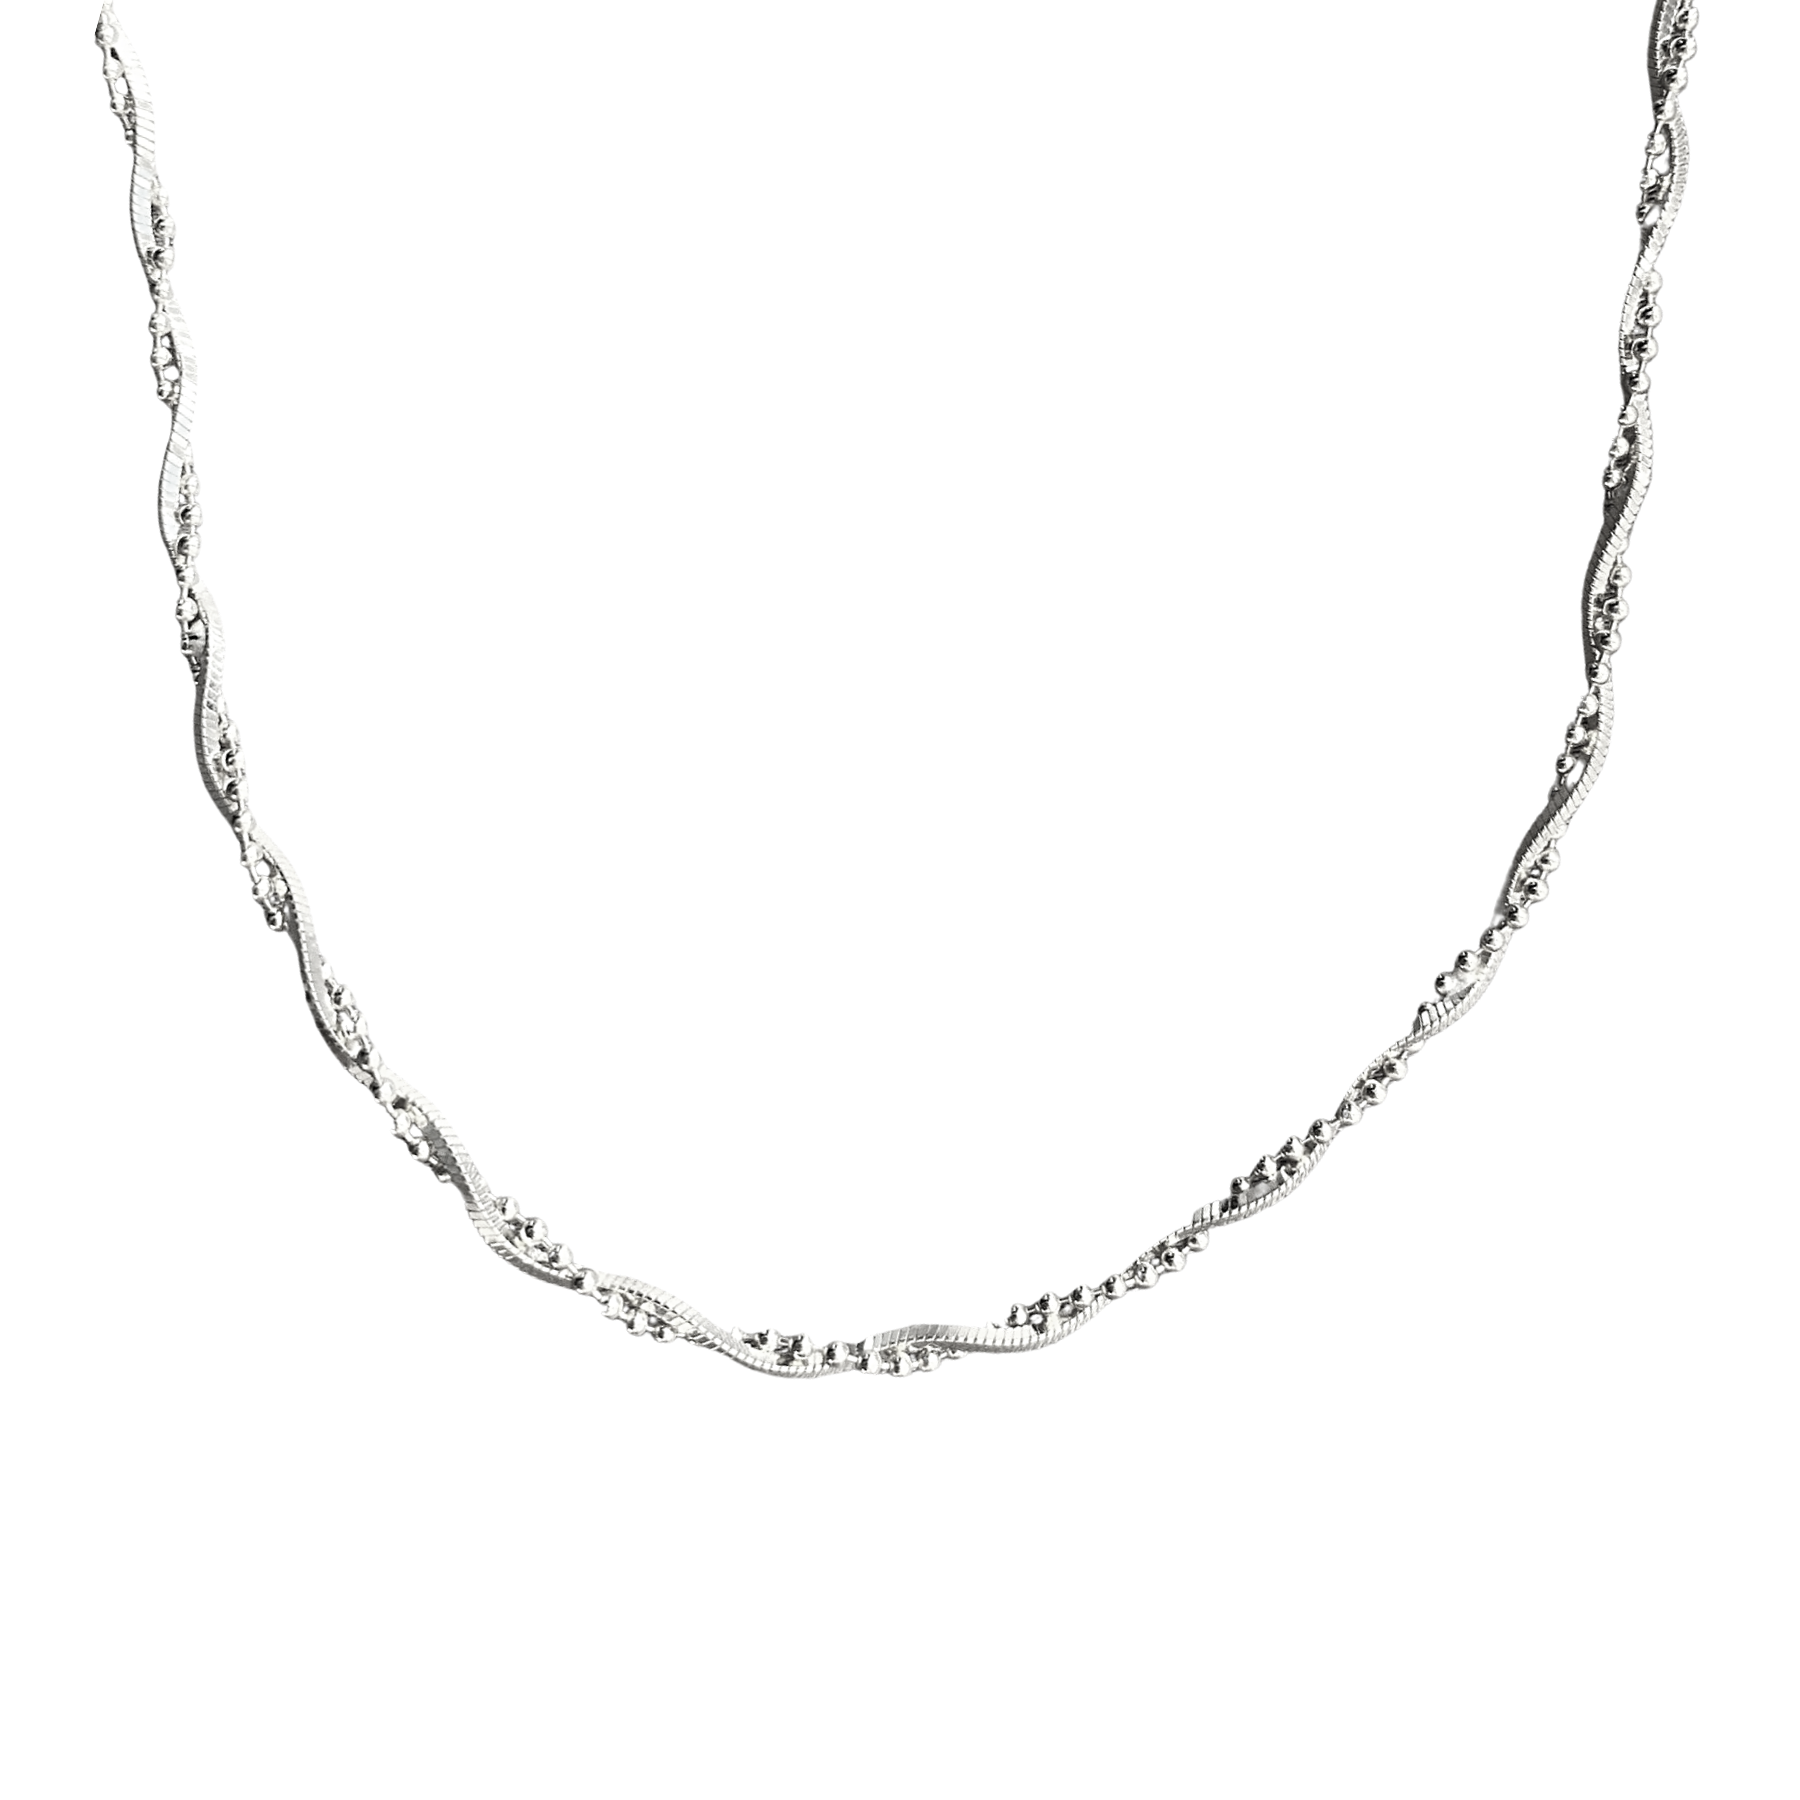 Twisted Beads Sterling Silver Chain Necklace - Spero London